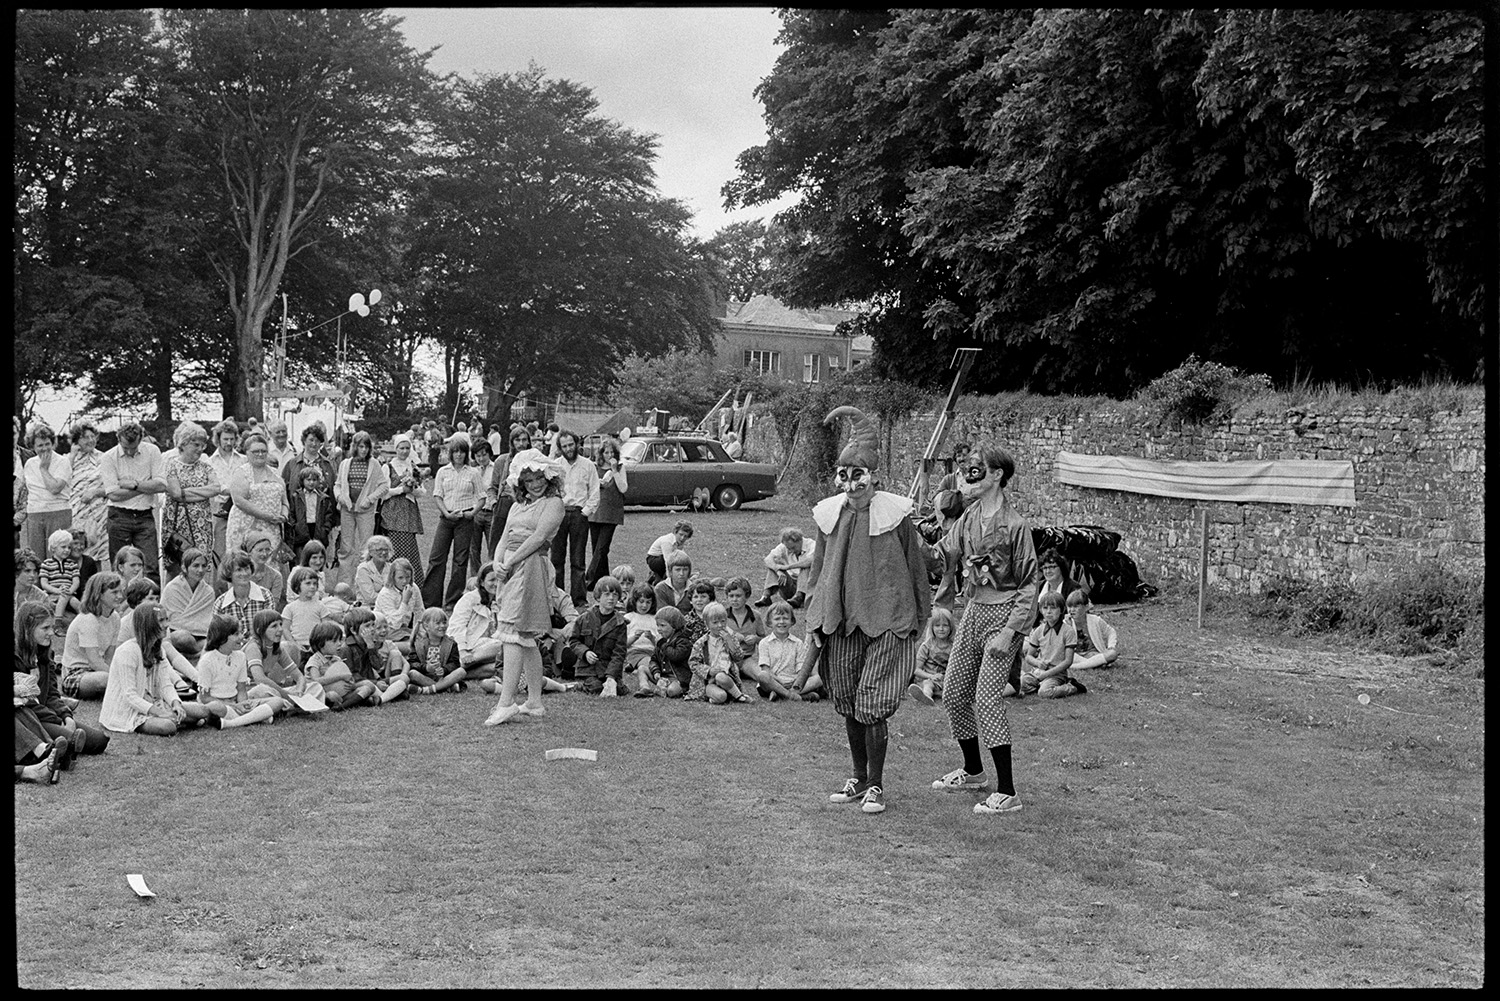 Performance of play at village revel. 
[A group of children sat on the grass wth adults stood behind watching an open air play at the Beaford Revel on the village green. The three actors performing are dressed in costumes.]